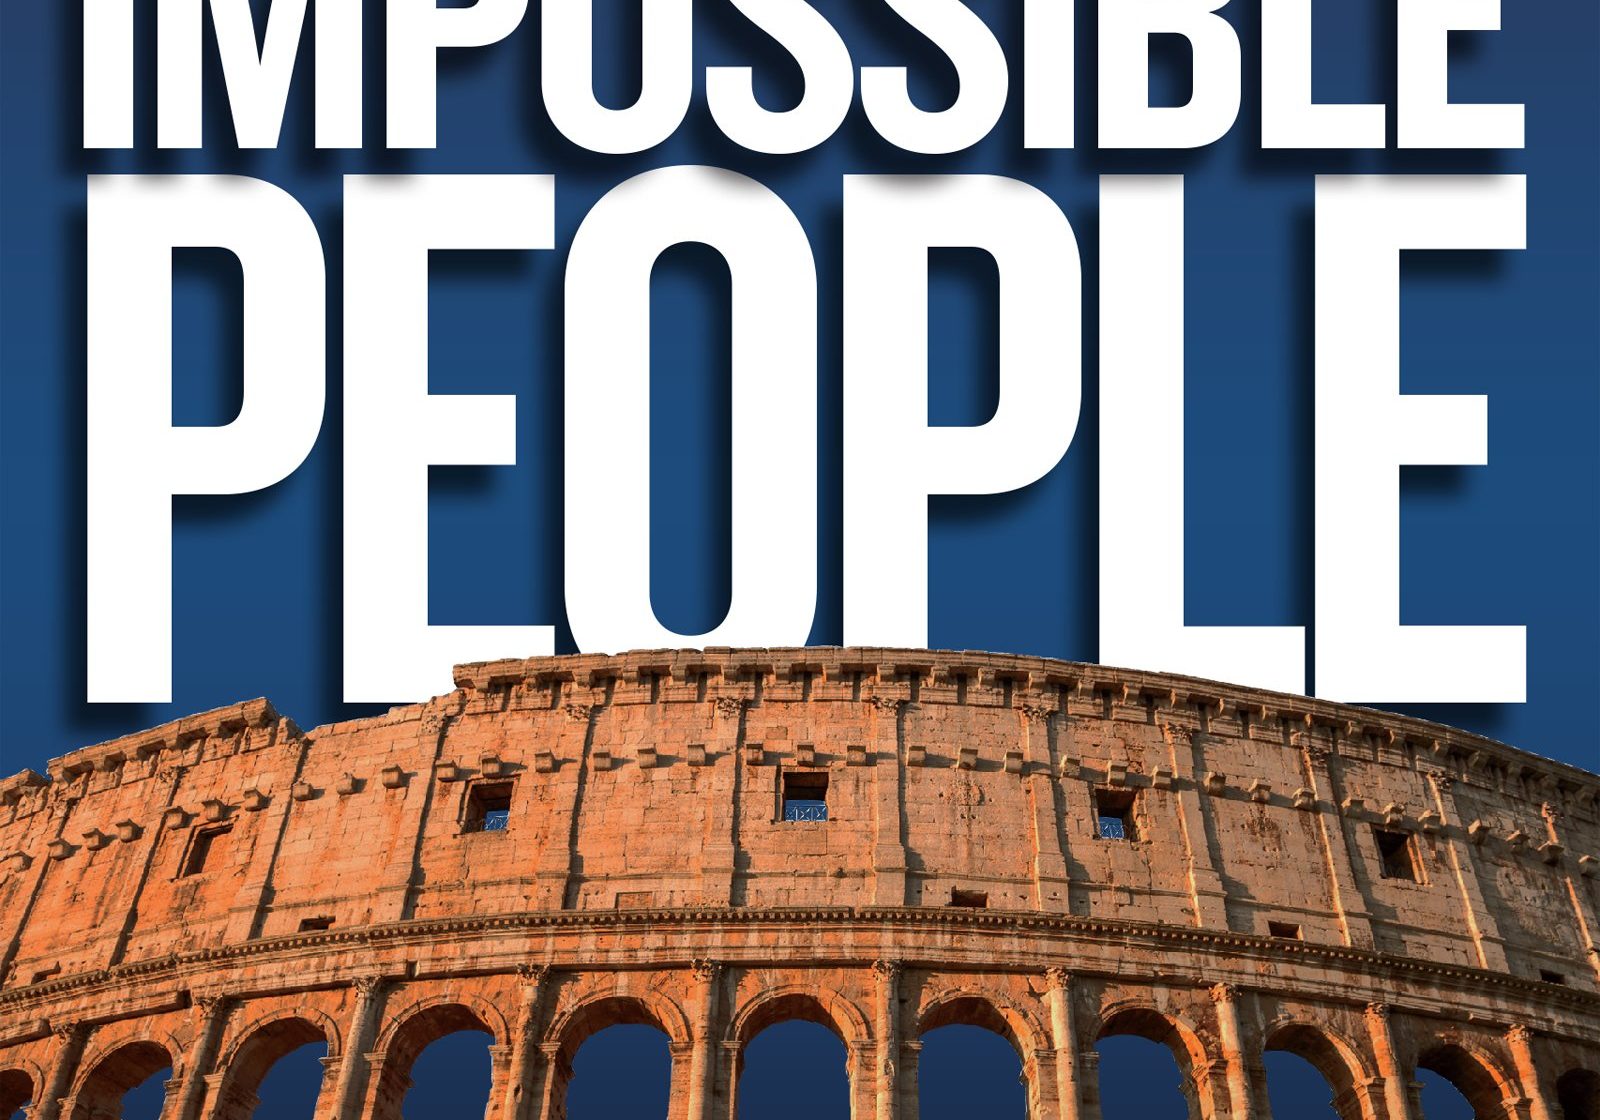 Impossible People by Os Guinness